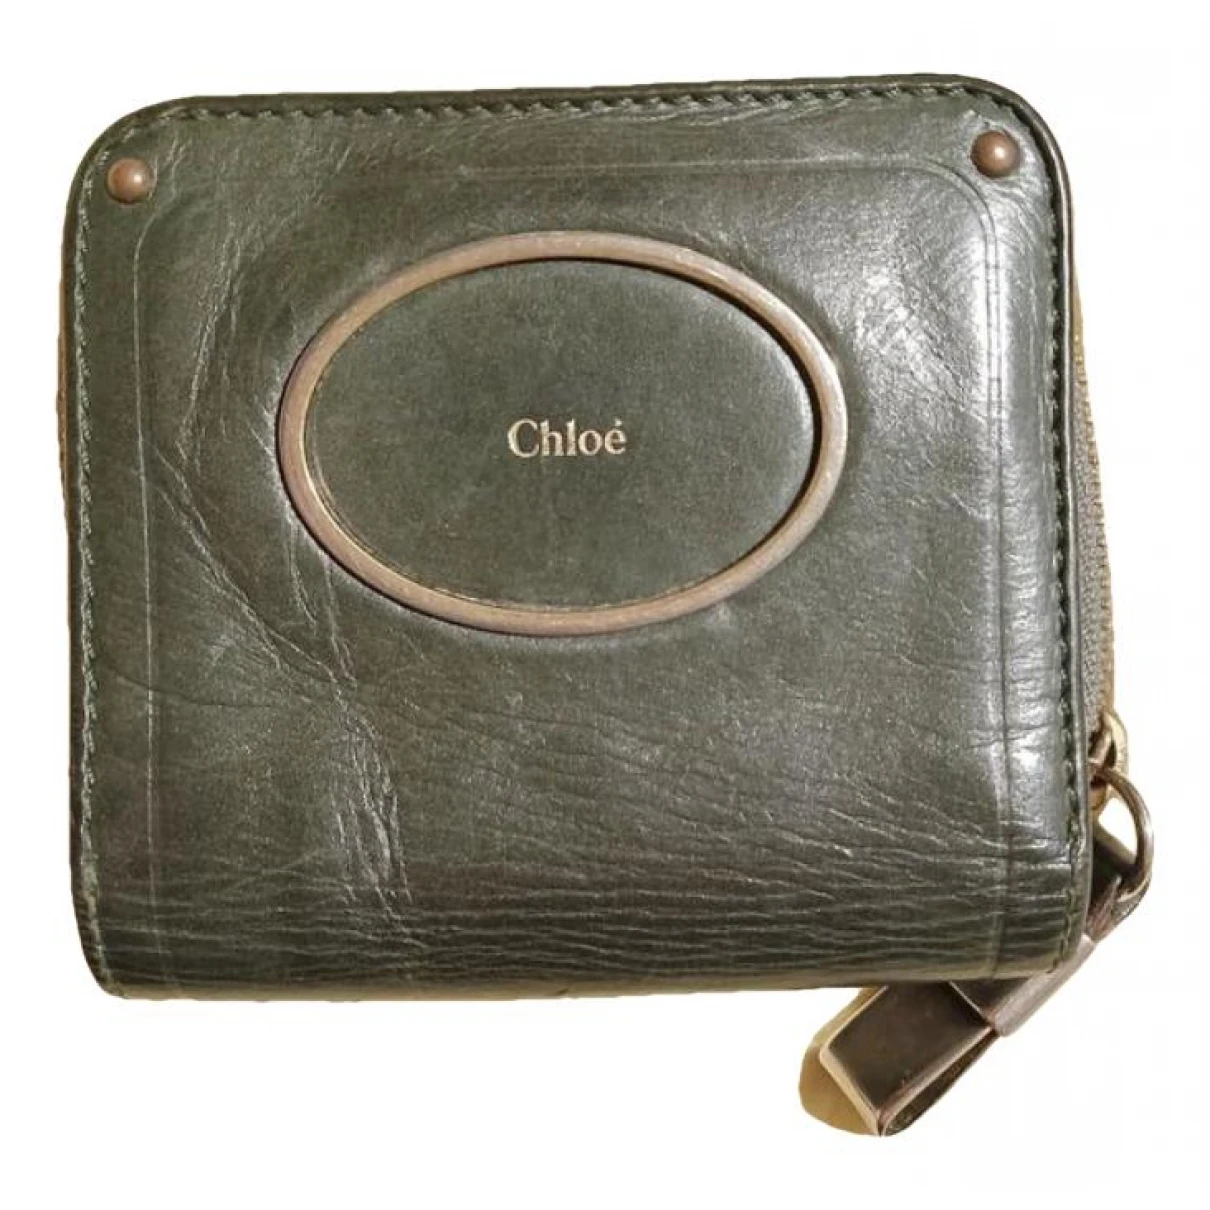 accessories Chloé wallets for Female Leather. Used condition